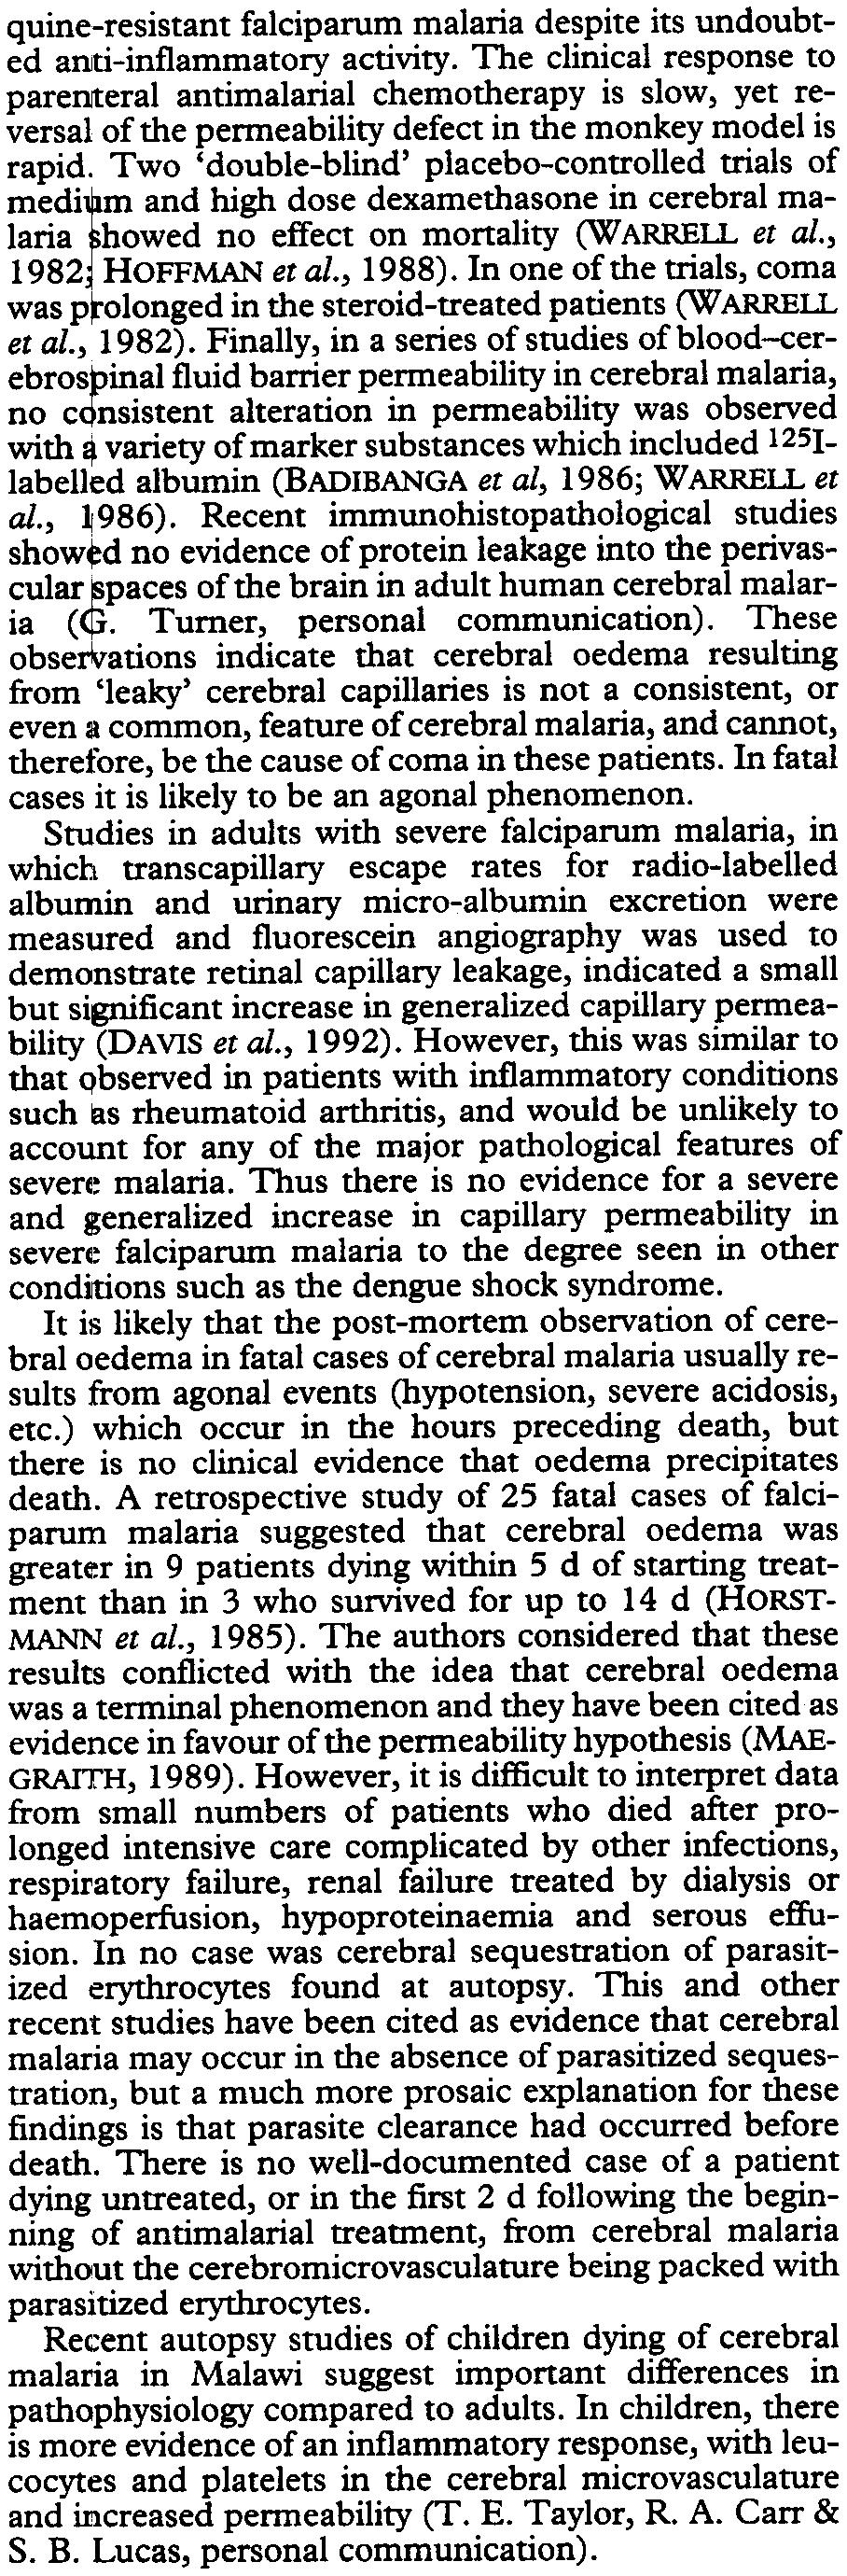 Two 'double-blind' placebo-controlled trials of medi f m and high dose dexamethasone in cerebral malaria howed no effect on monality (WARREIL et al., 1982 HOFFMAN et al., 1988).